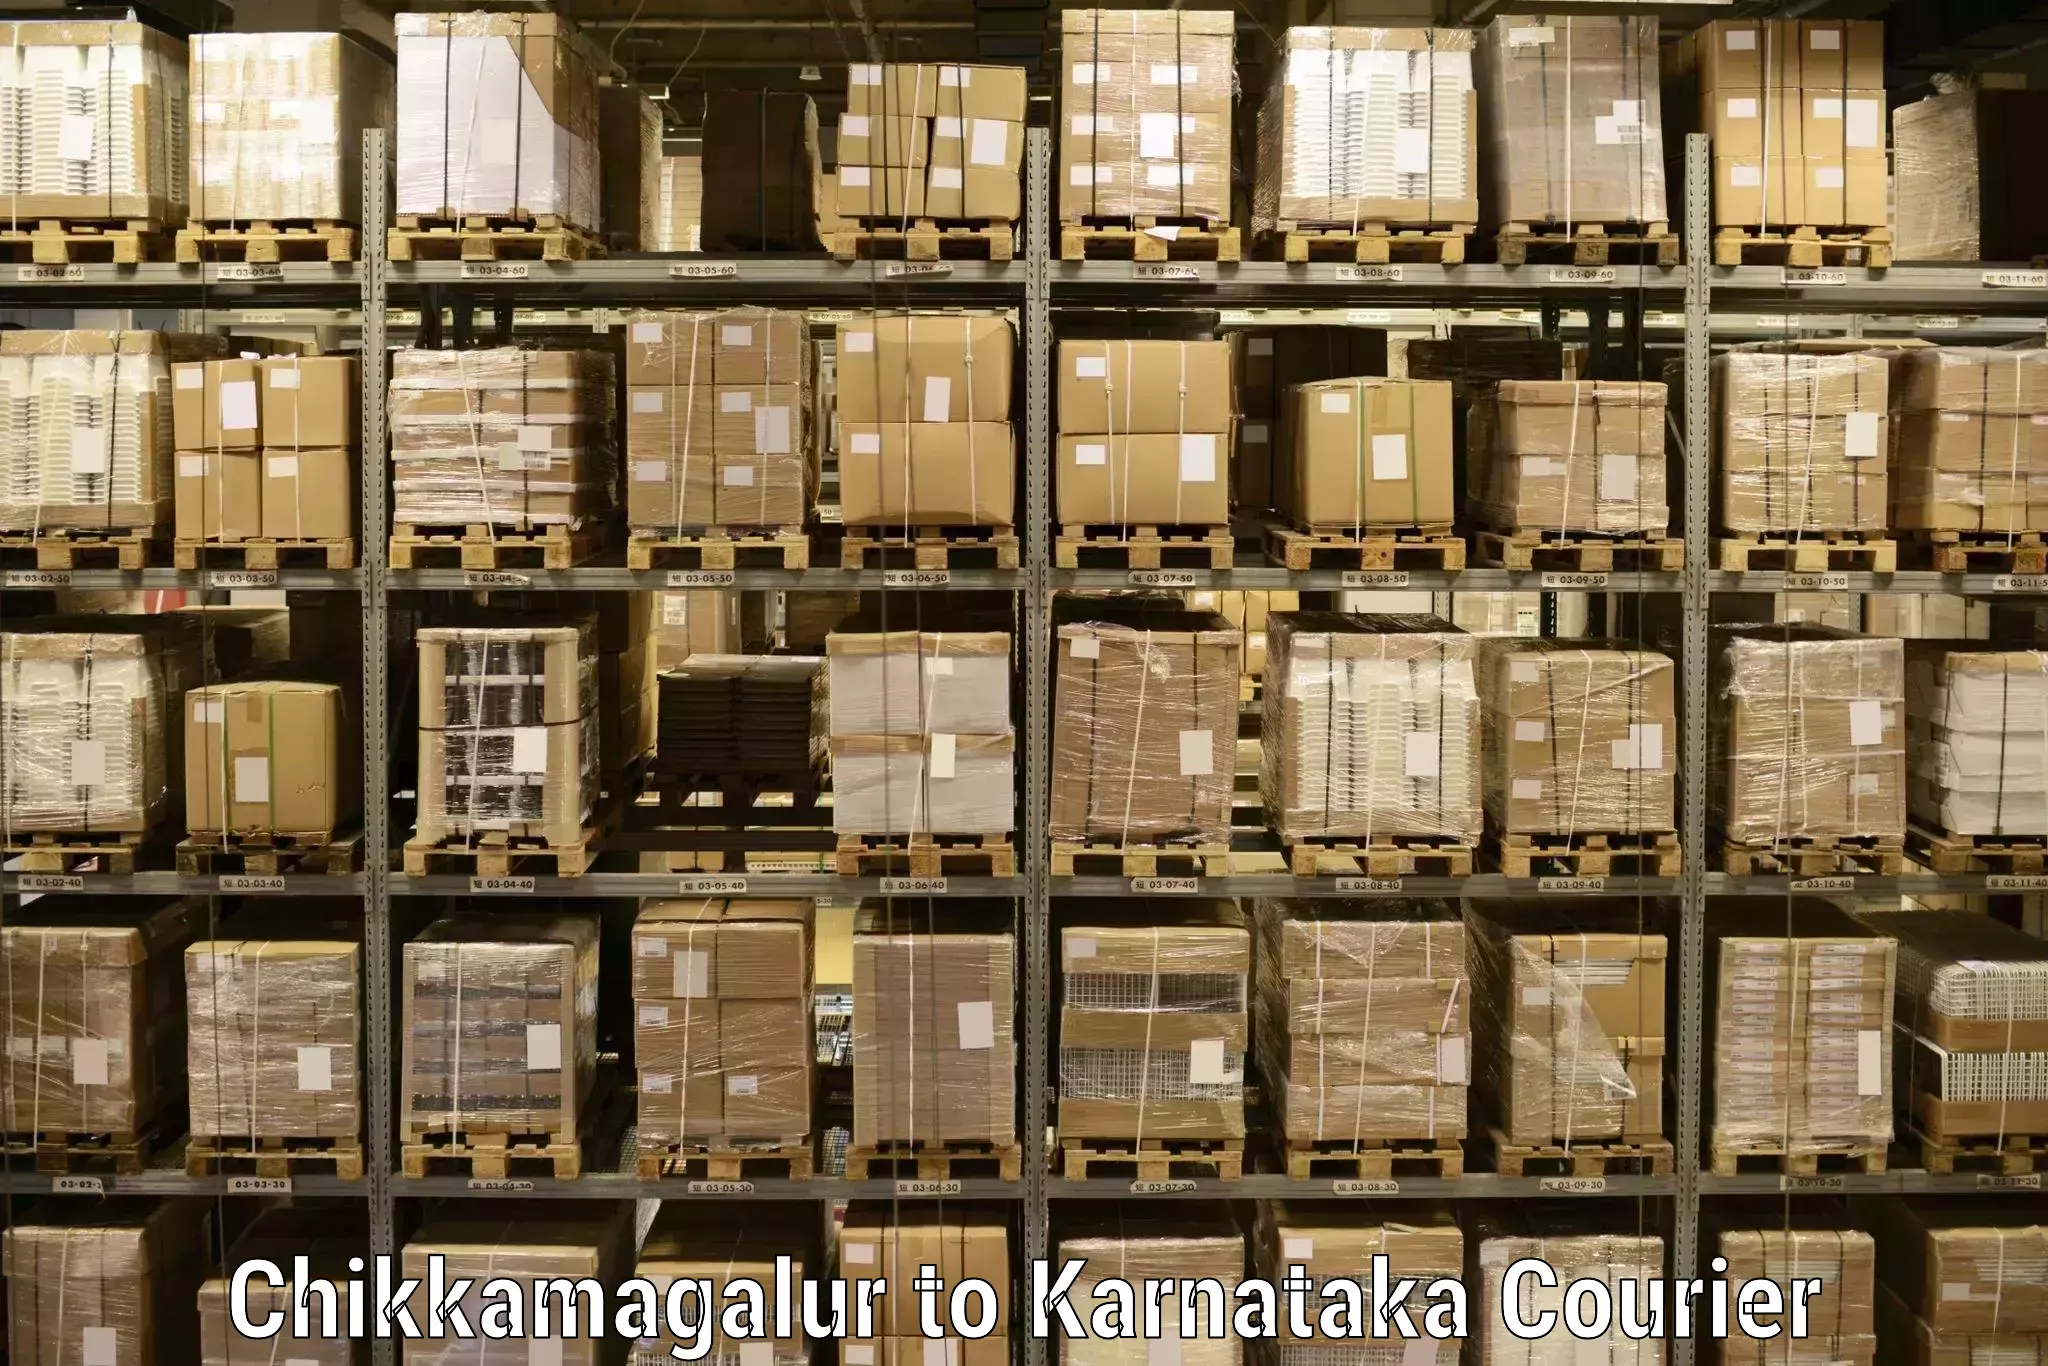 Easy access courier services Chikkamagalur to Hagaribommanahalli